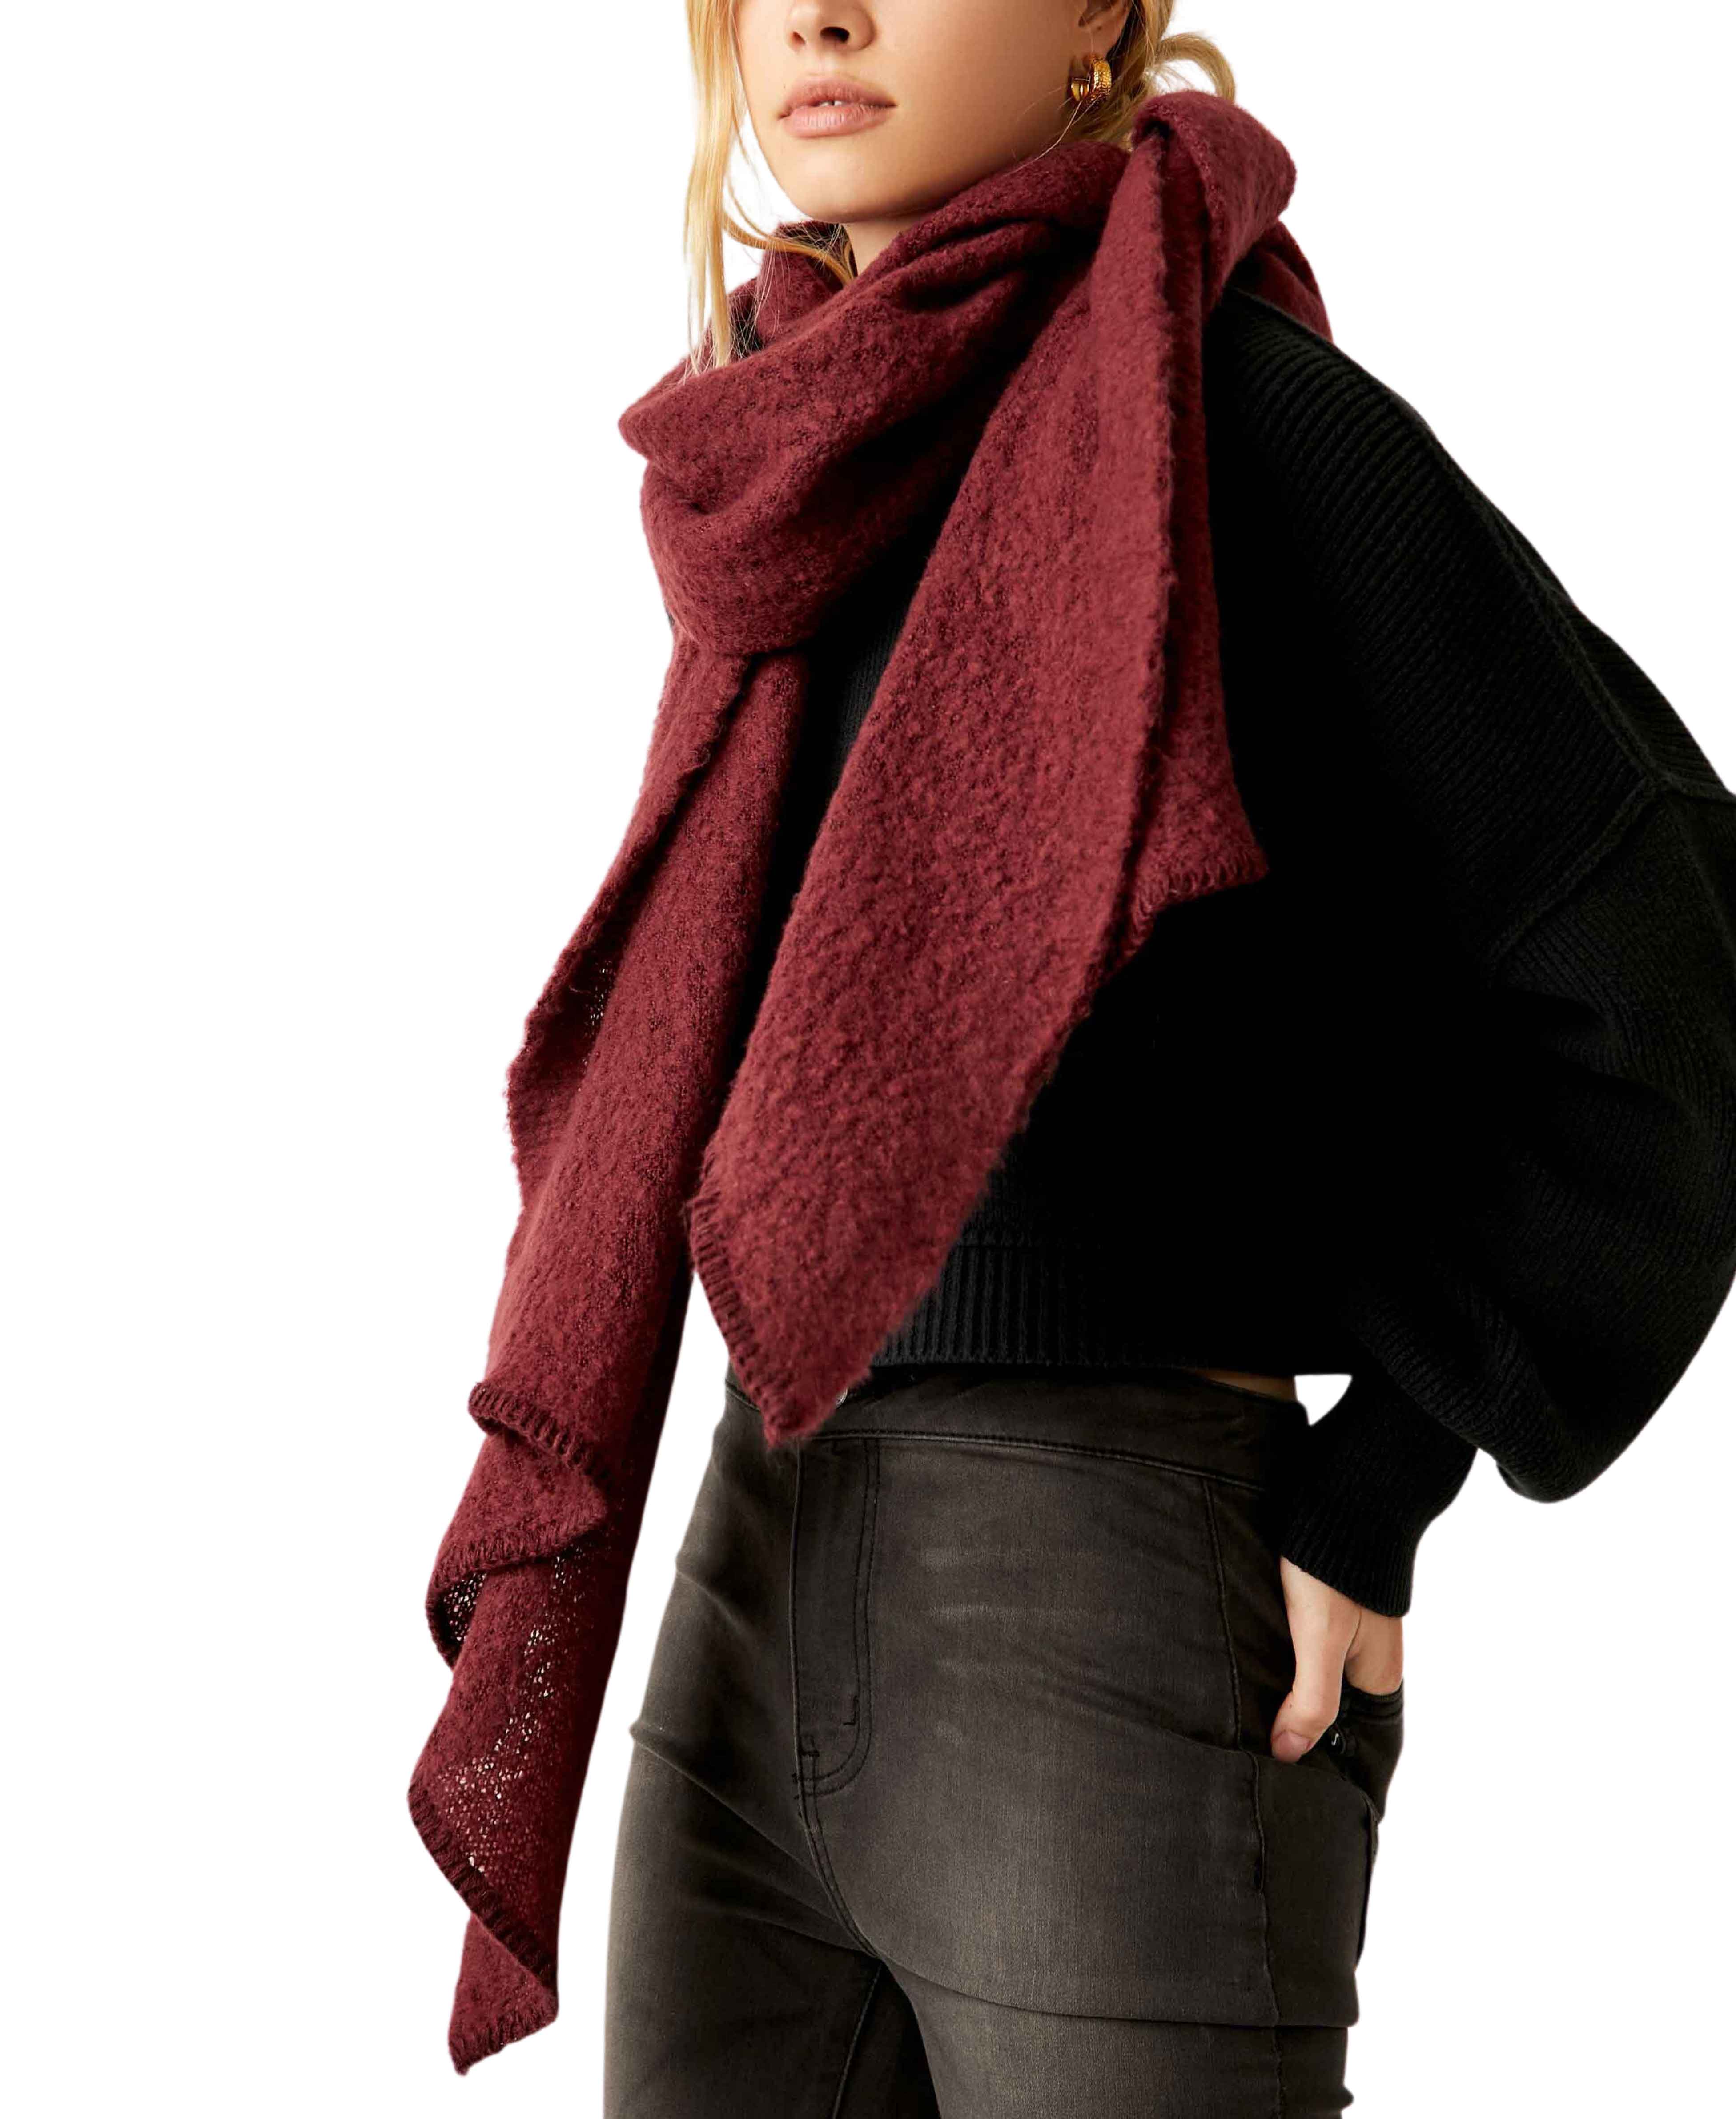 Rangeley Recycled Blend Scarf